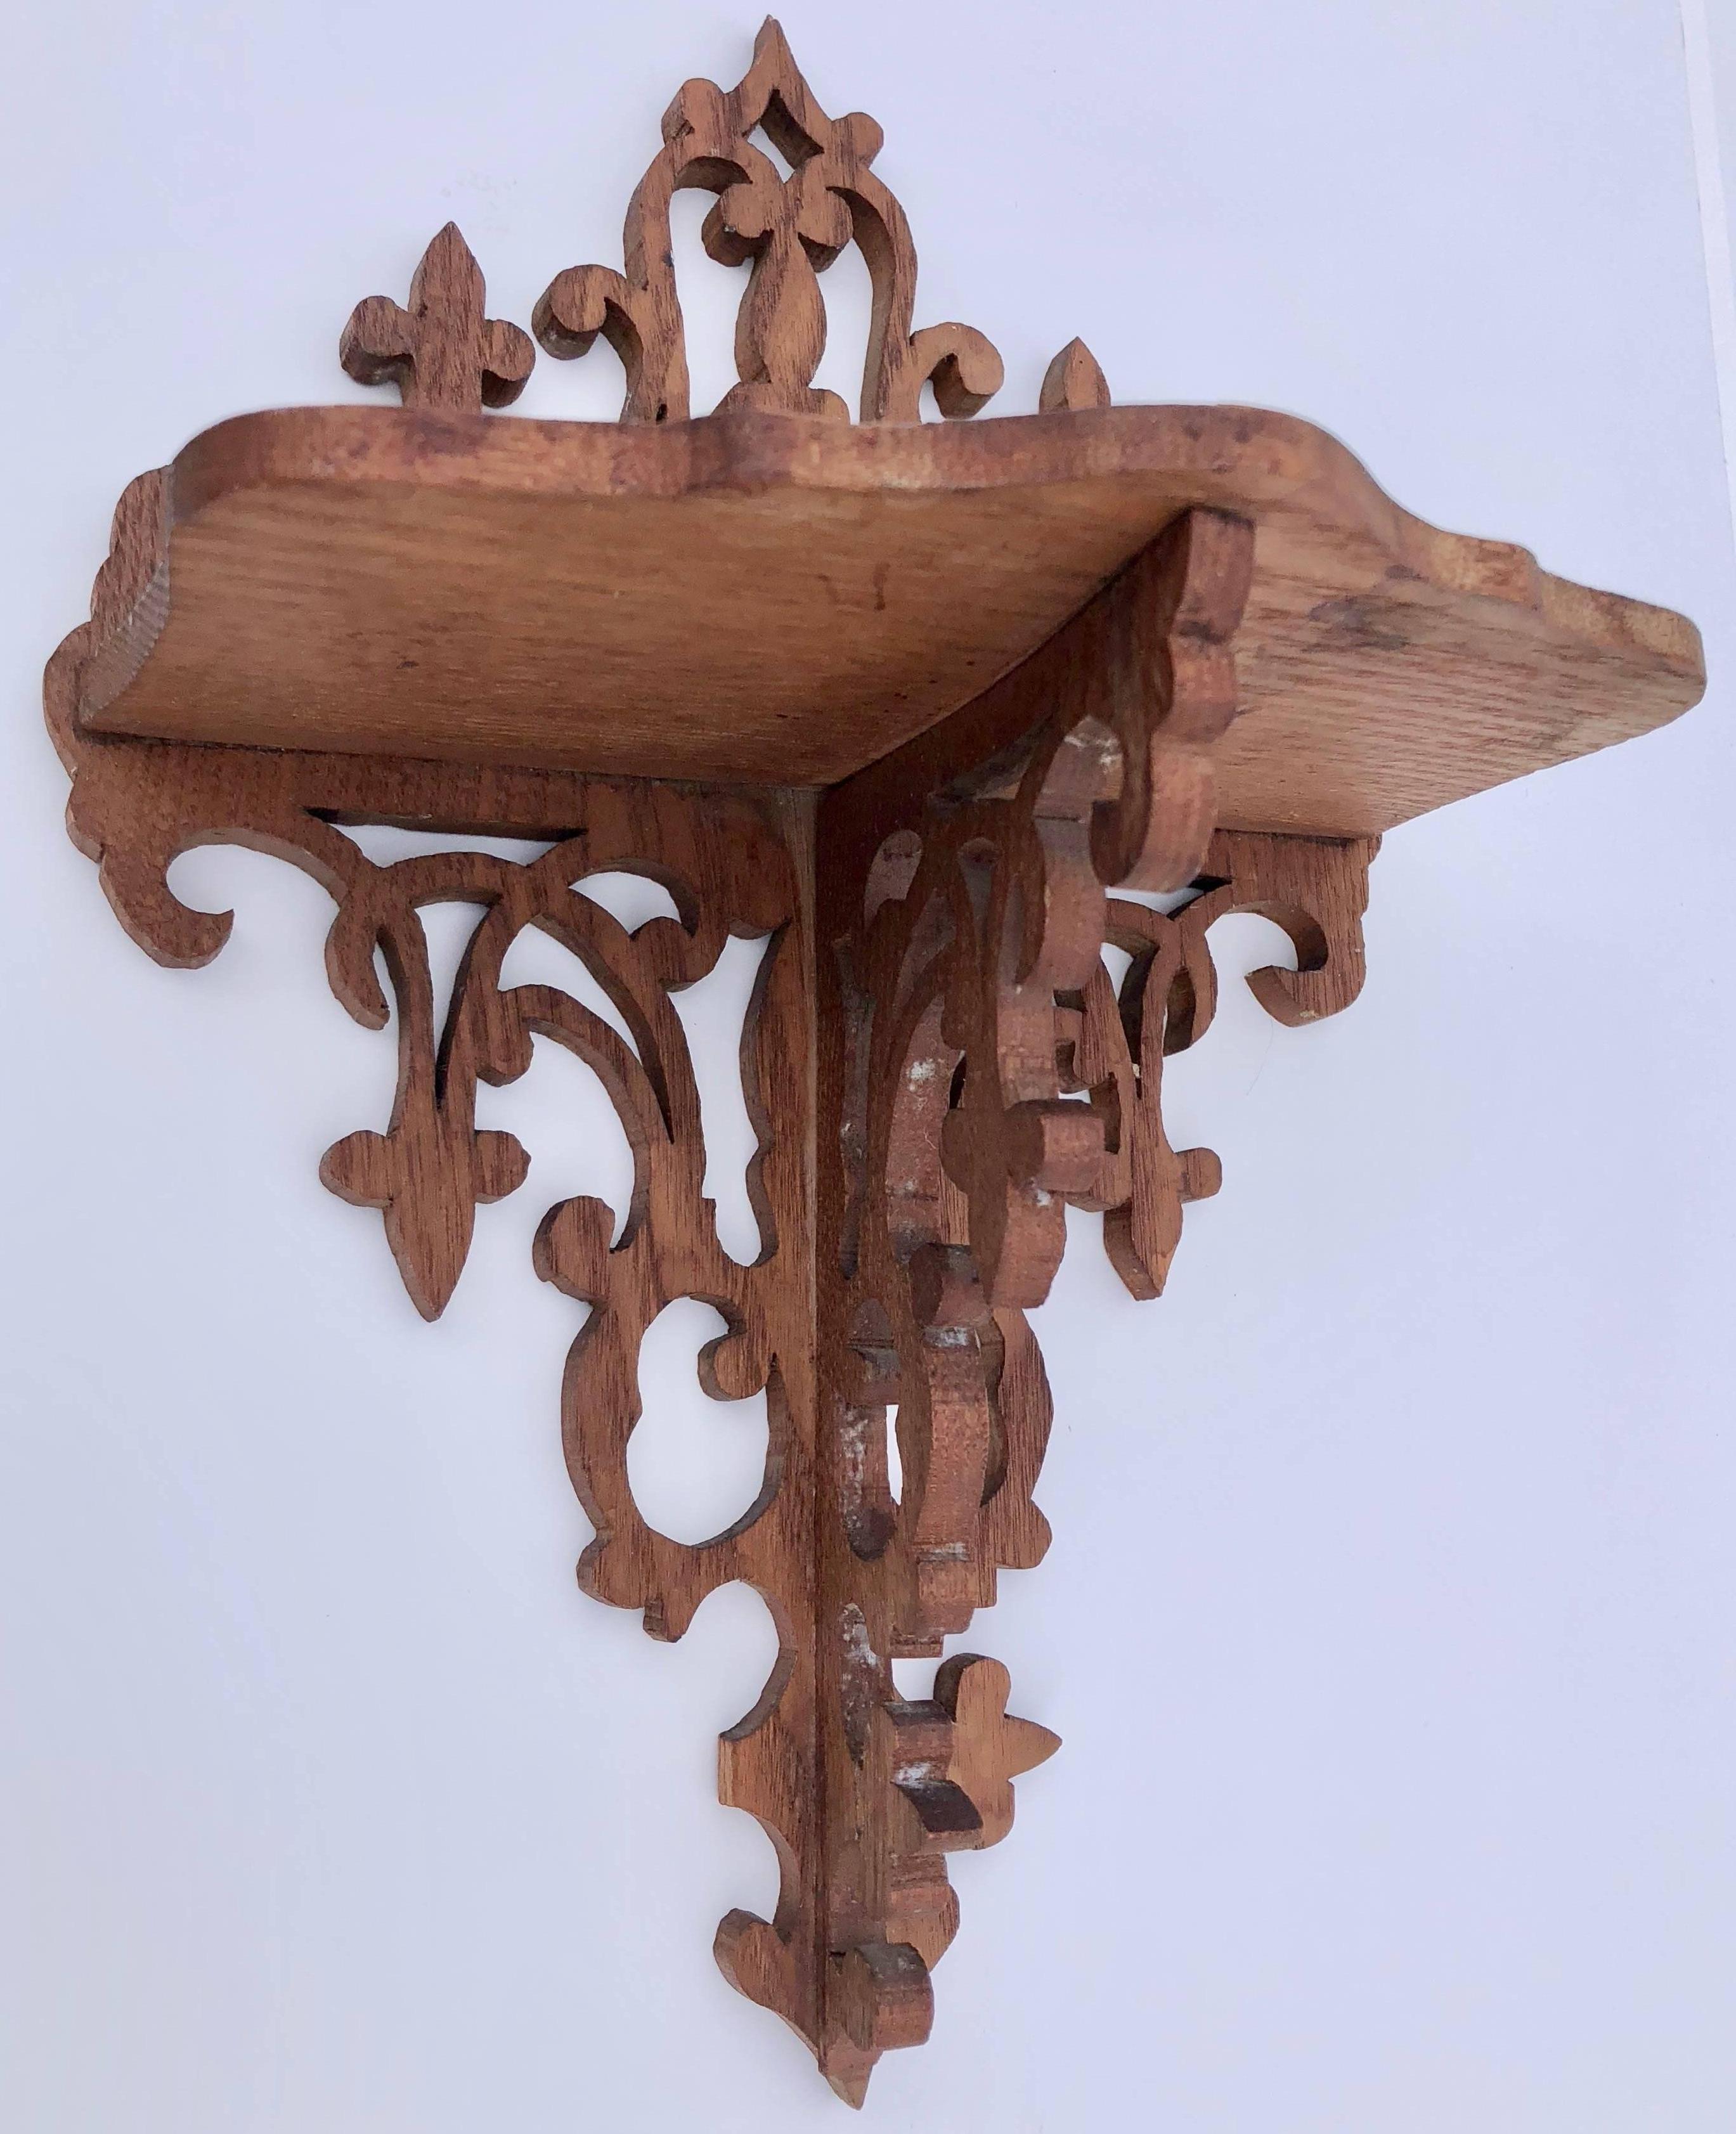 This beautiful hand carved wood wall sconce has an exquisite design and a shelf. It would be a perfect display for any small work of art or decorative object.

          